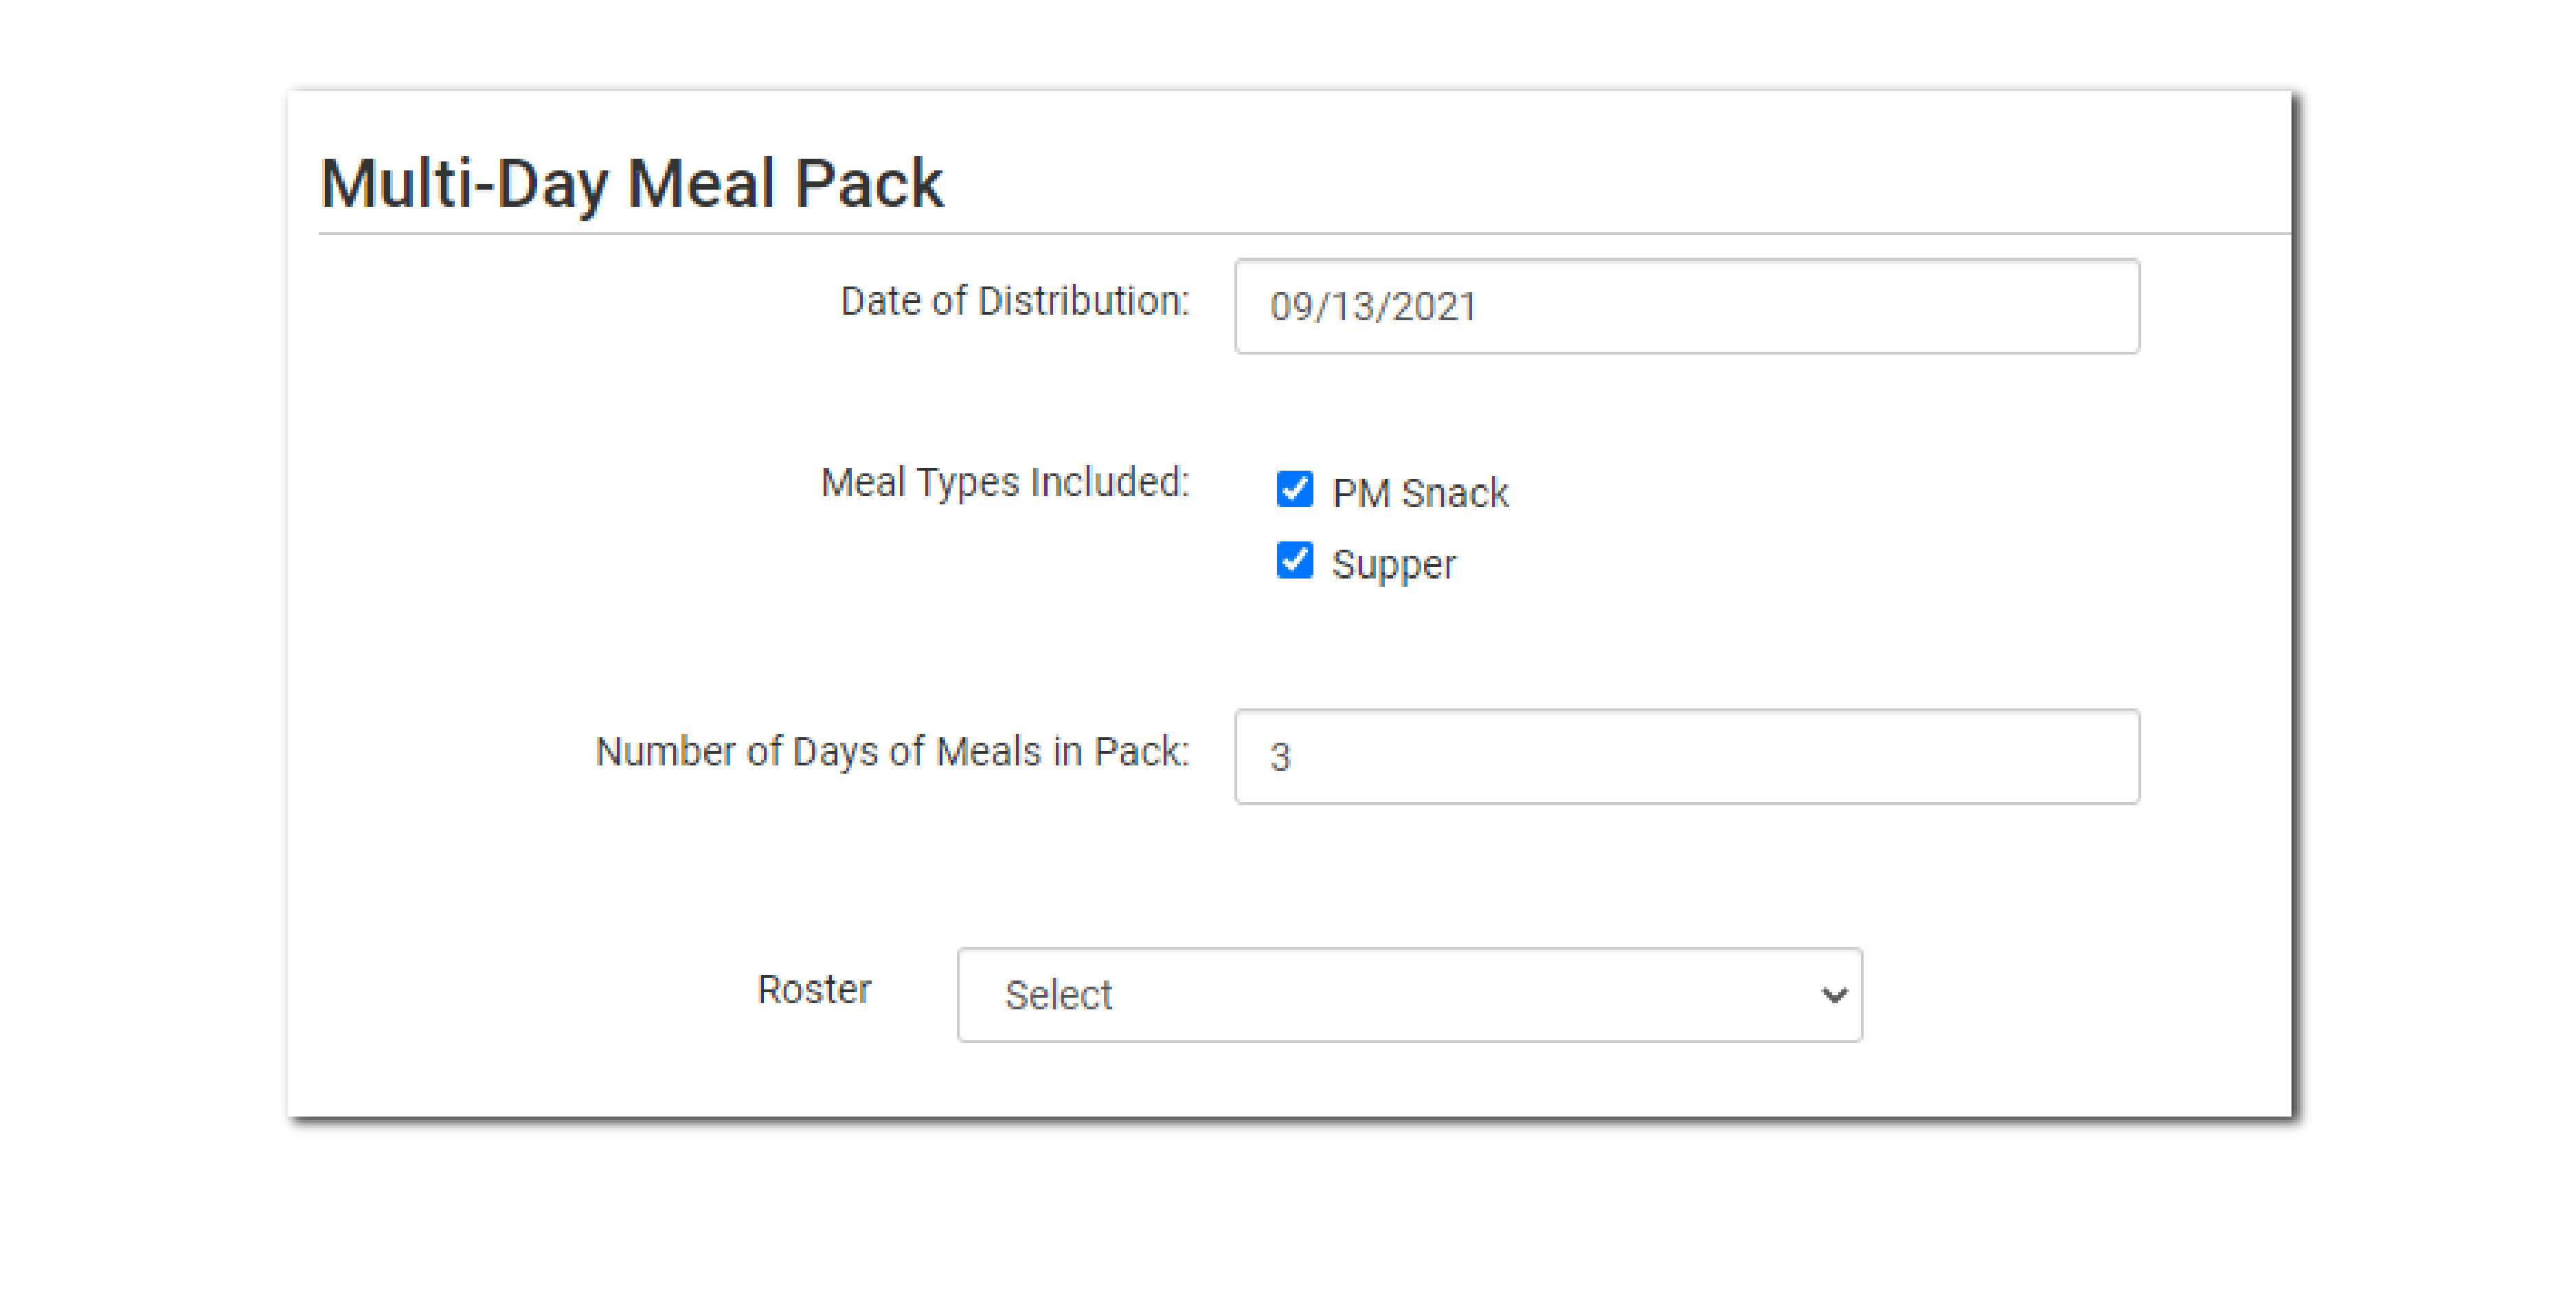 Multi-Day Meal Pack